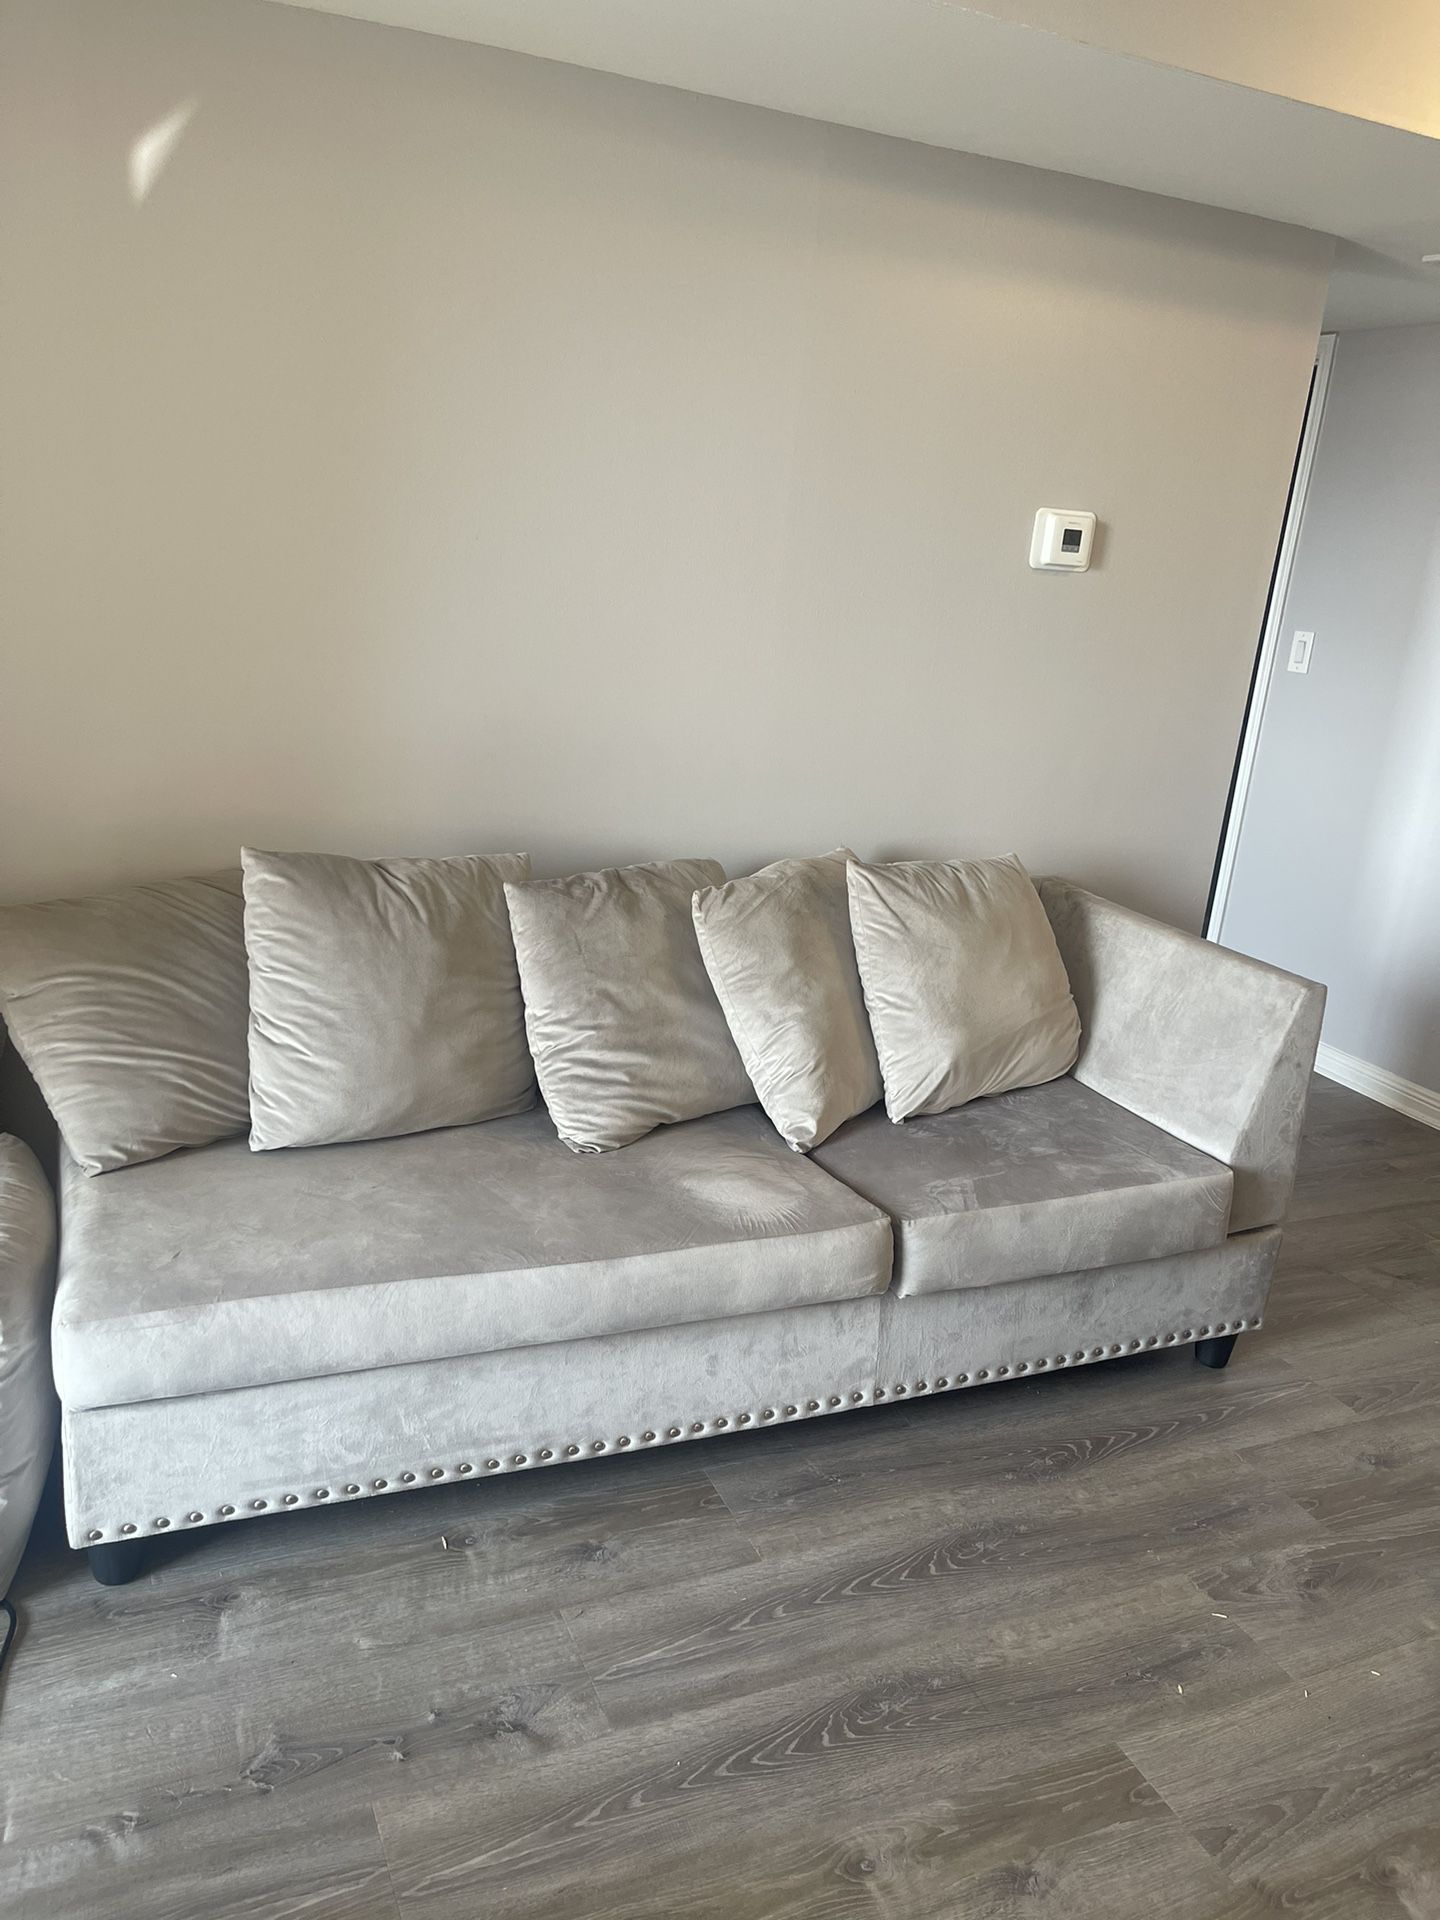 Sofa In Good Condition 